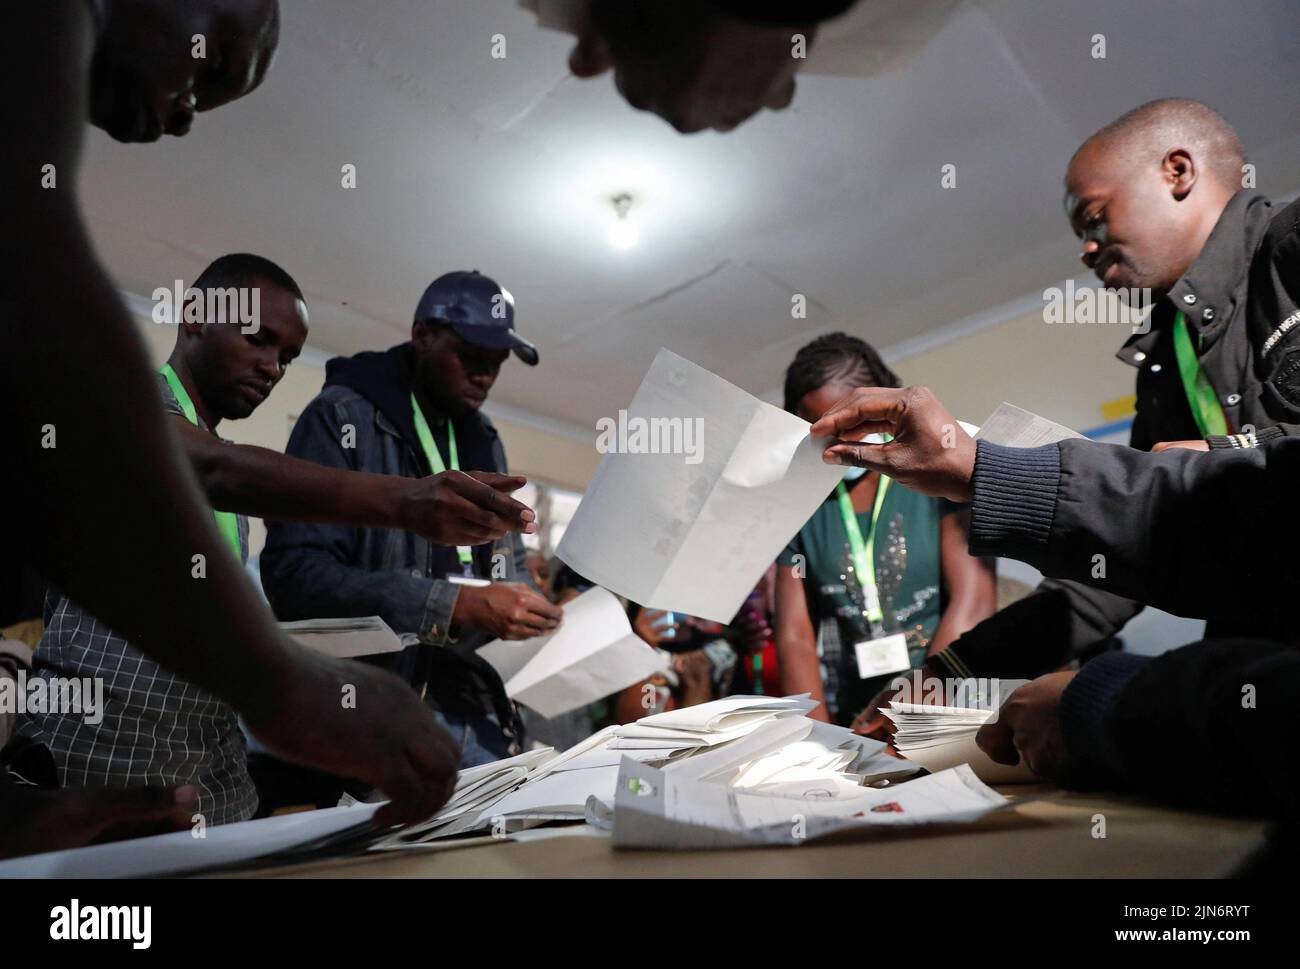 Electoral officials sort cast ballot papers during the general election conducted by the Independent Electoral and Boundaries Commission (IEBC) at the close of the voting process at the Moi Avenue Primary School in Nairobi, Kenya August 9, 2022. REUTERS/Thomas Mukoya Stock Photo